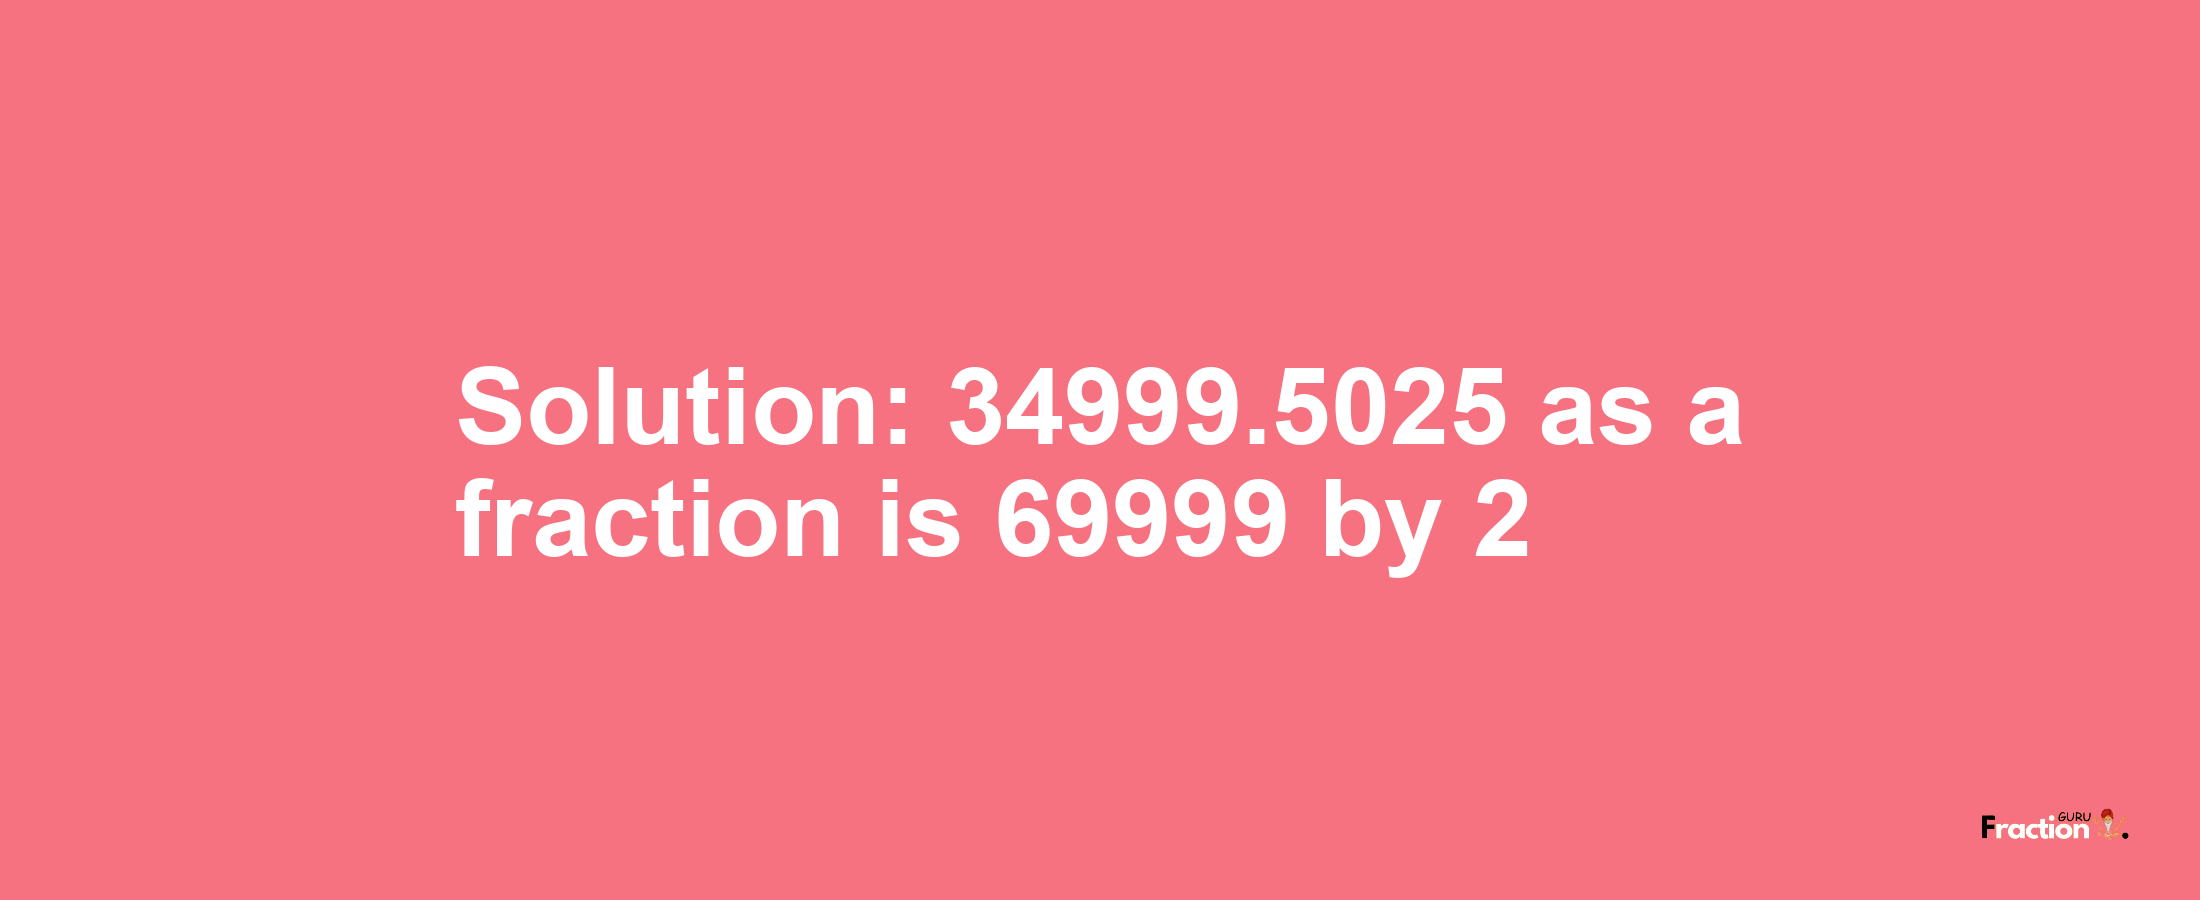 Solution:34999.5025 as a fraction is 69999/2